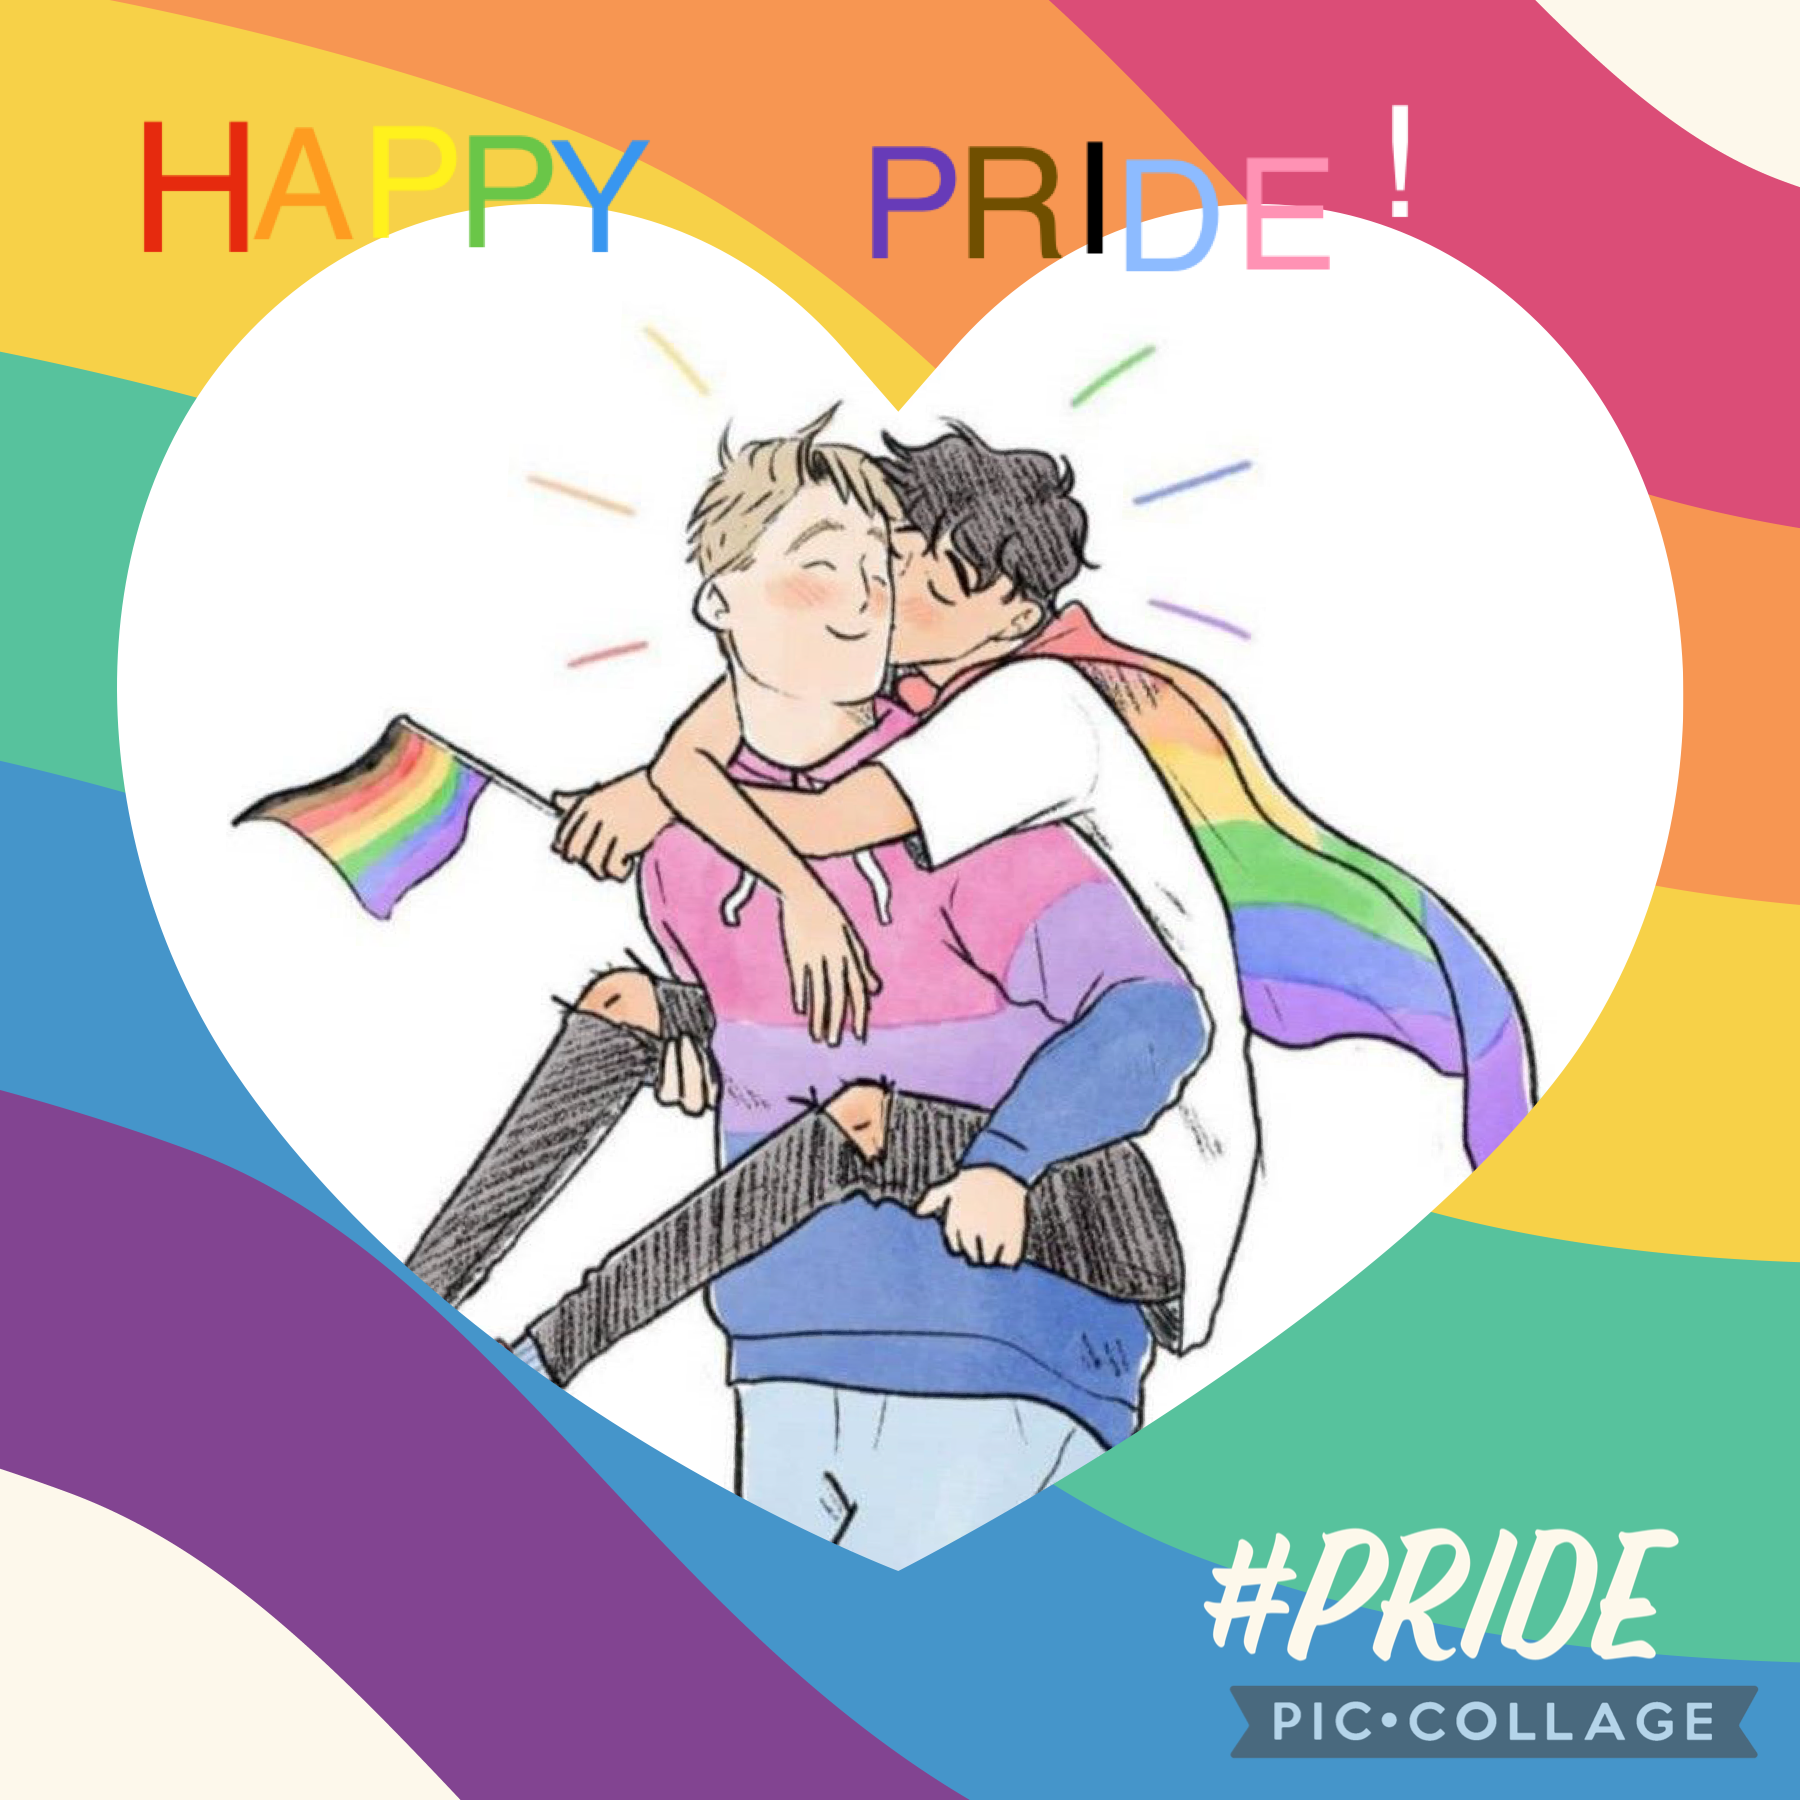 Happy Pride Month to all my fellow LGBTQIA+ community members! This is your month and I am proud of you! 🏳️‍🌈🏳️‍🌈🏳️‍🌈🏳️‍🌈🏳️‍🌈